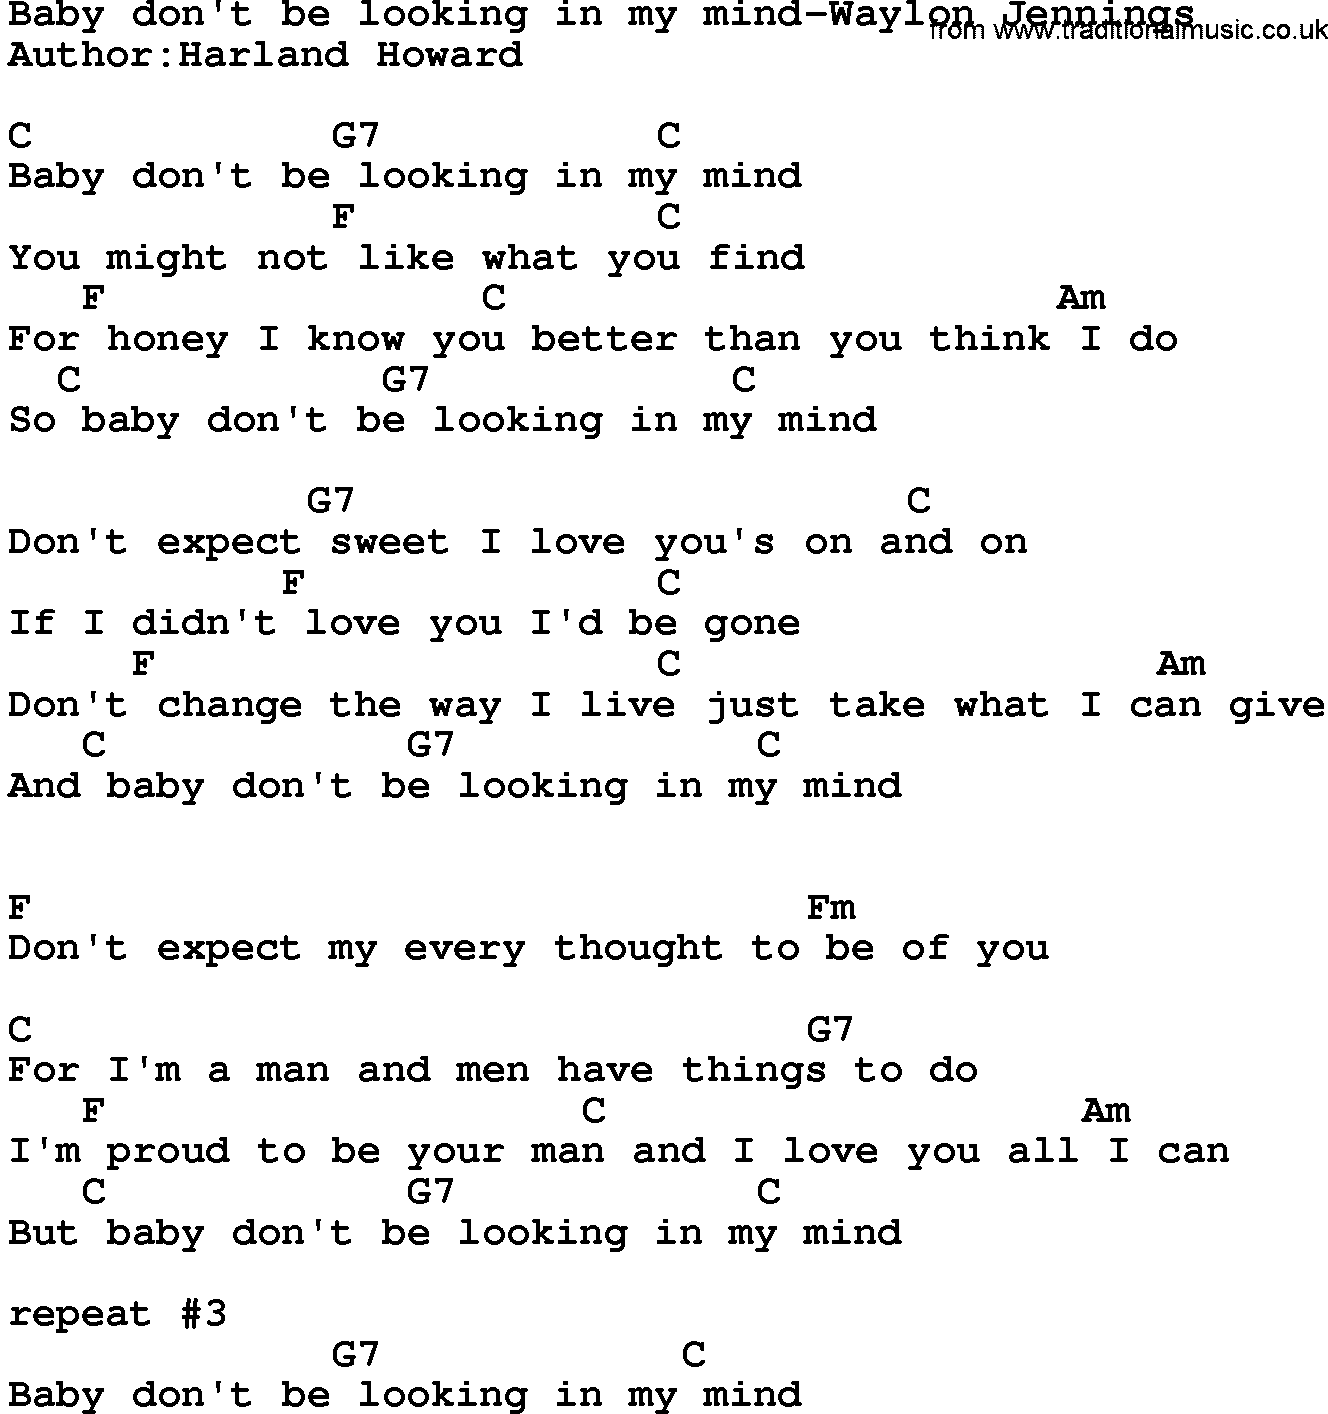 Country music song: Baby Don't Be Looking In My Mind-Waylon Jennings lyrics and chords